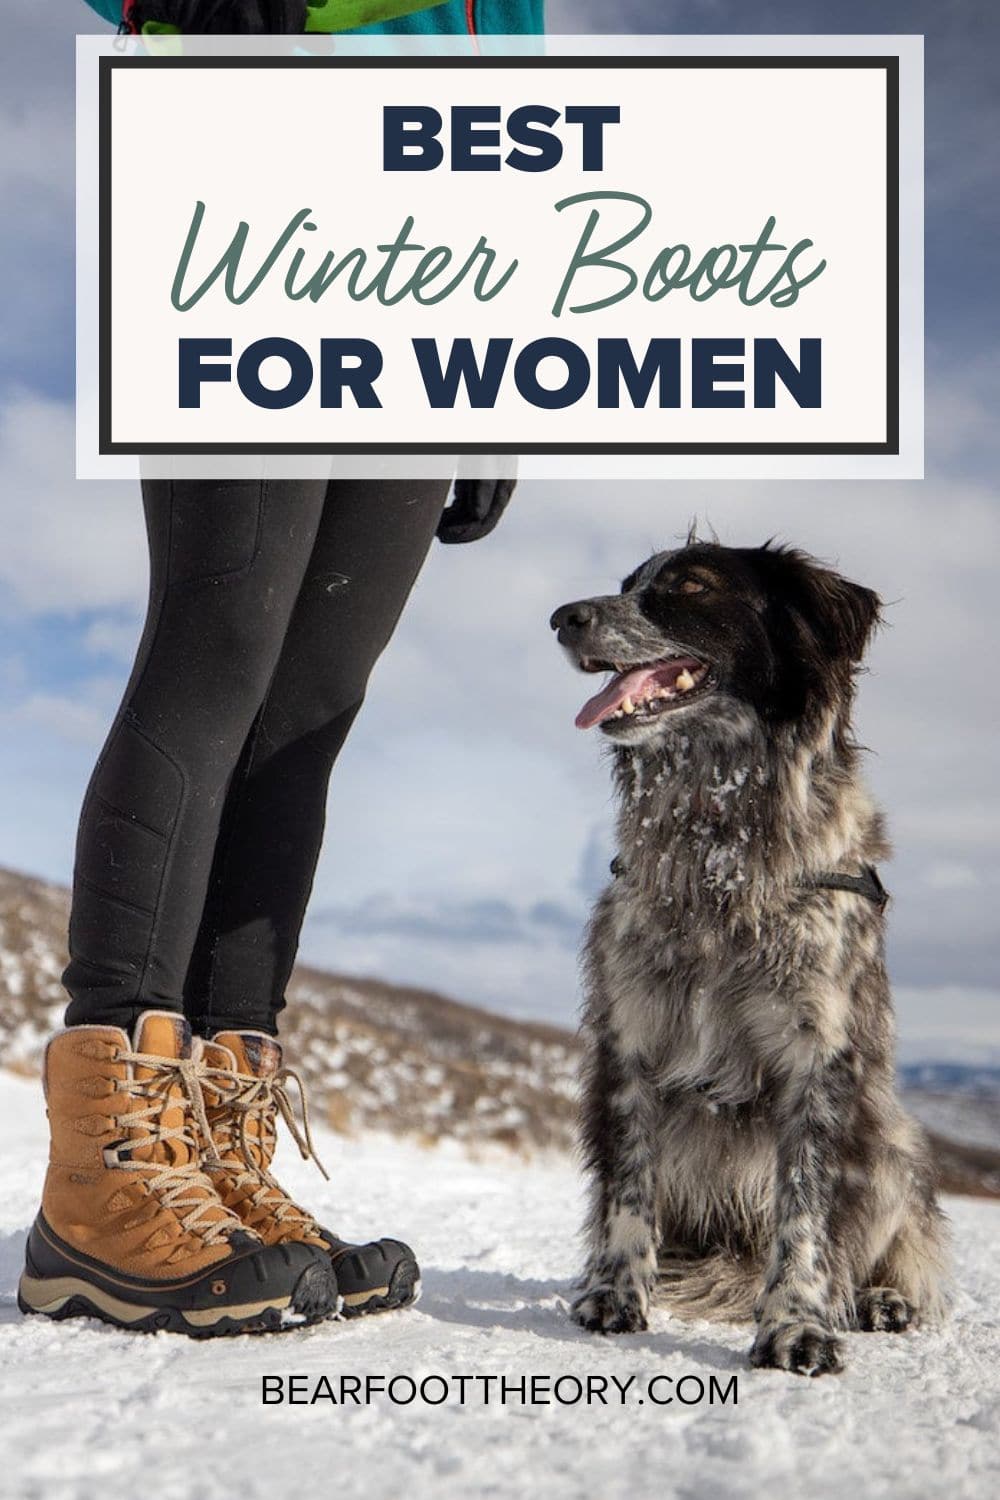 We've rounded up the best women's winter boots to keep your feet dry and warm on every type of winter adventure.